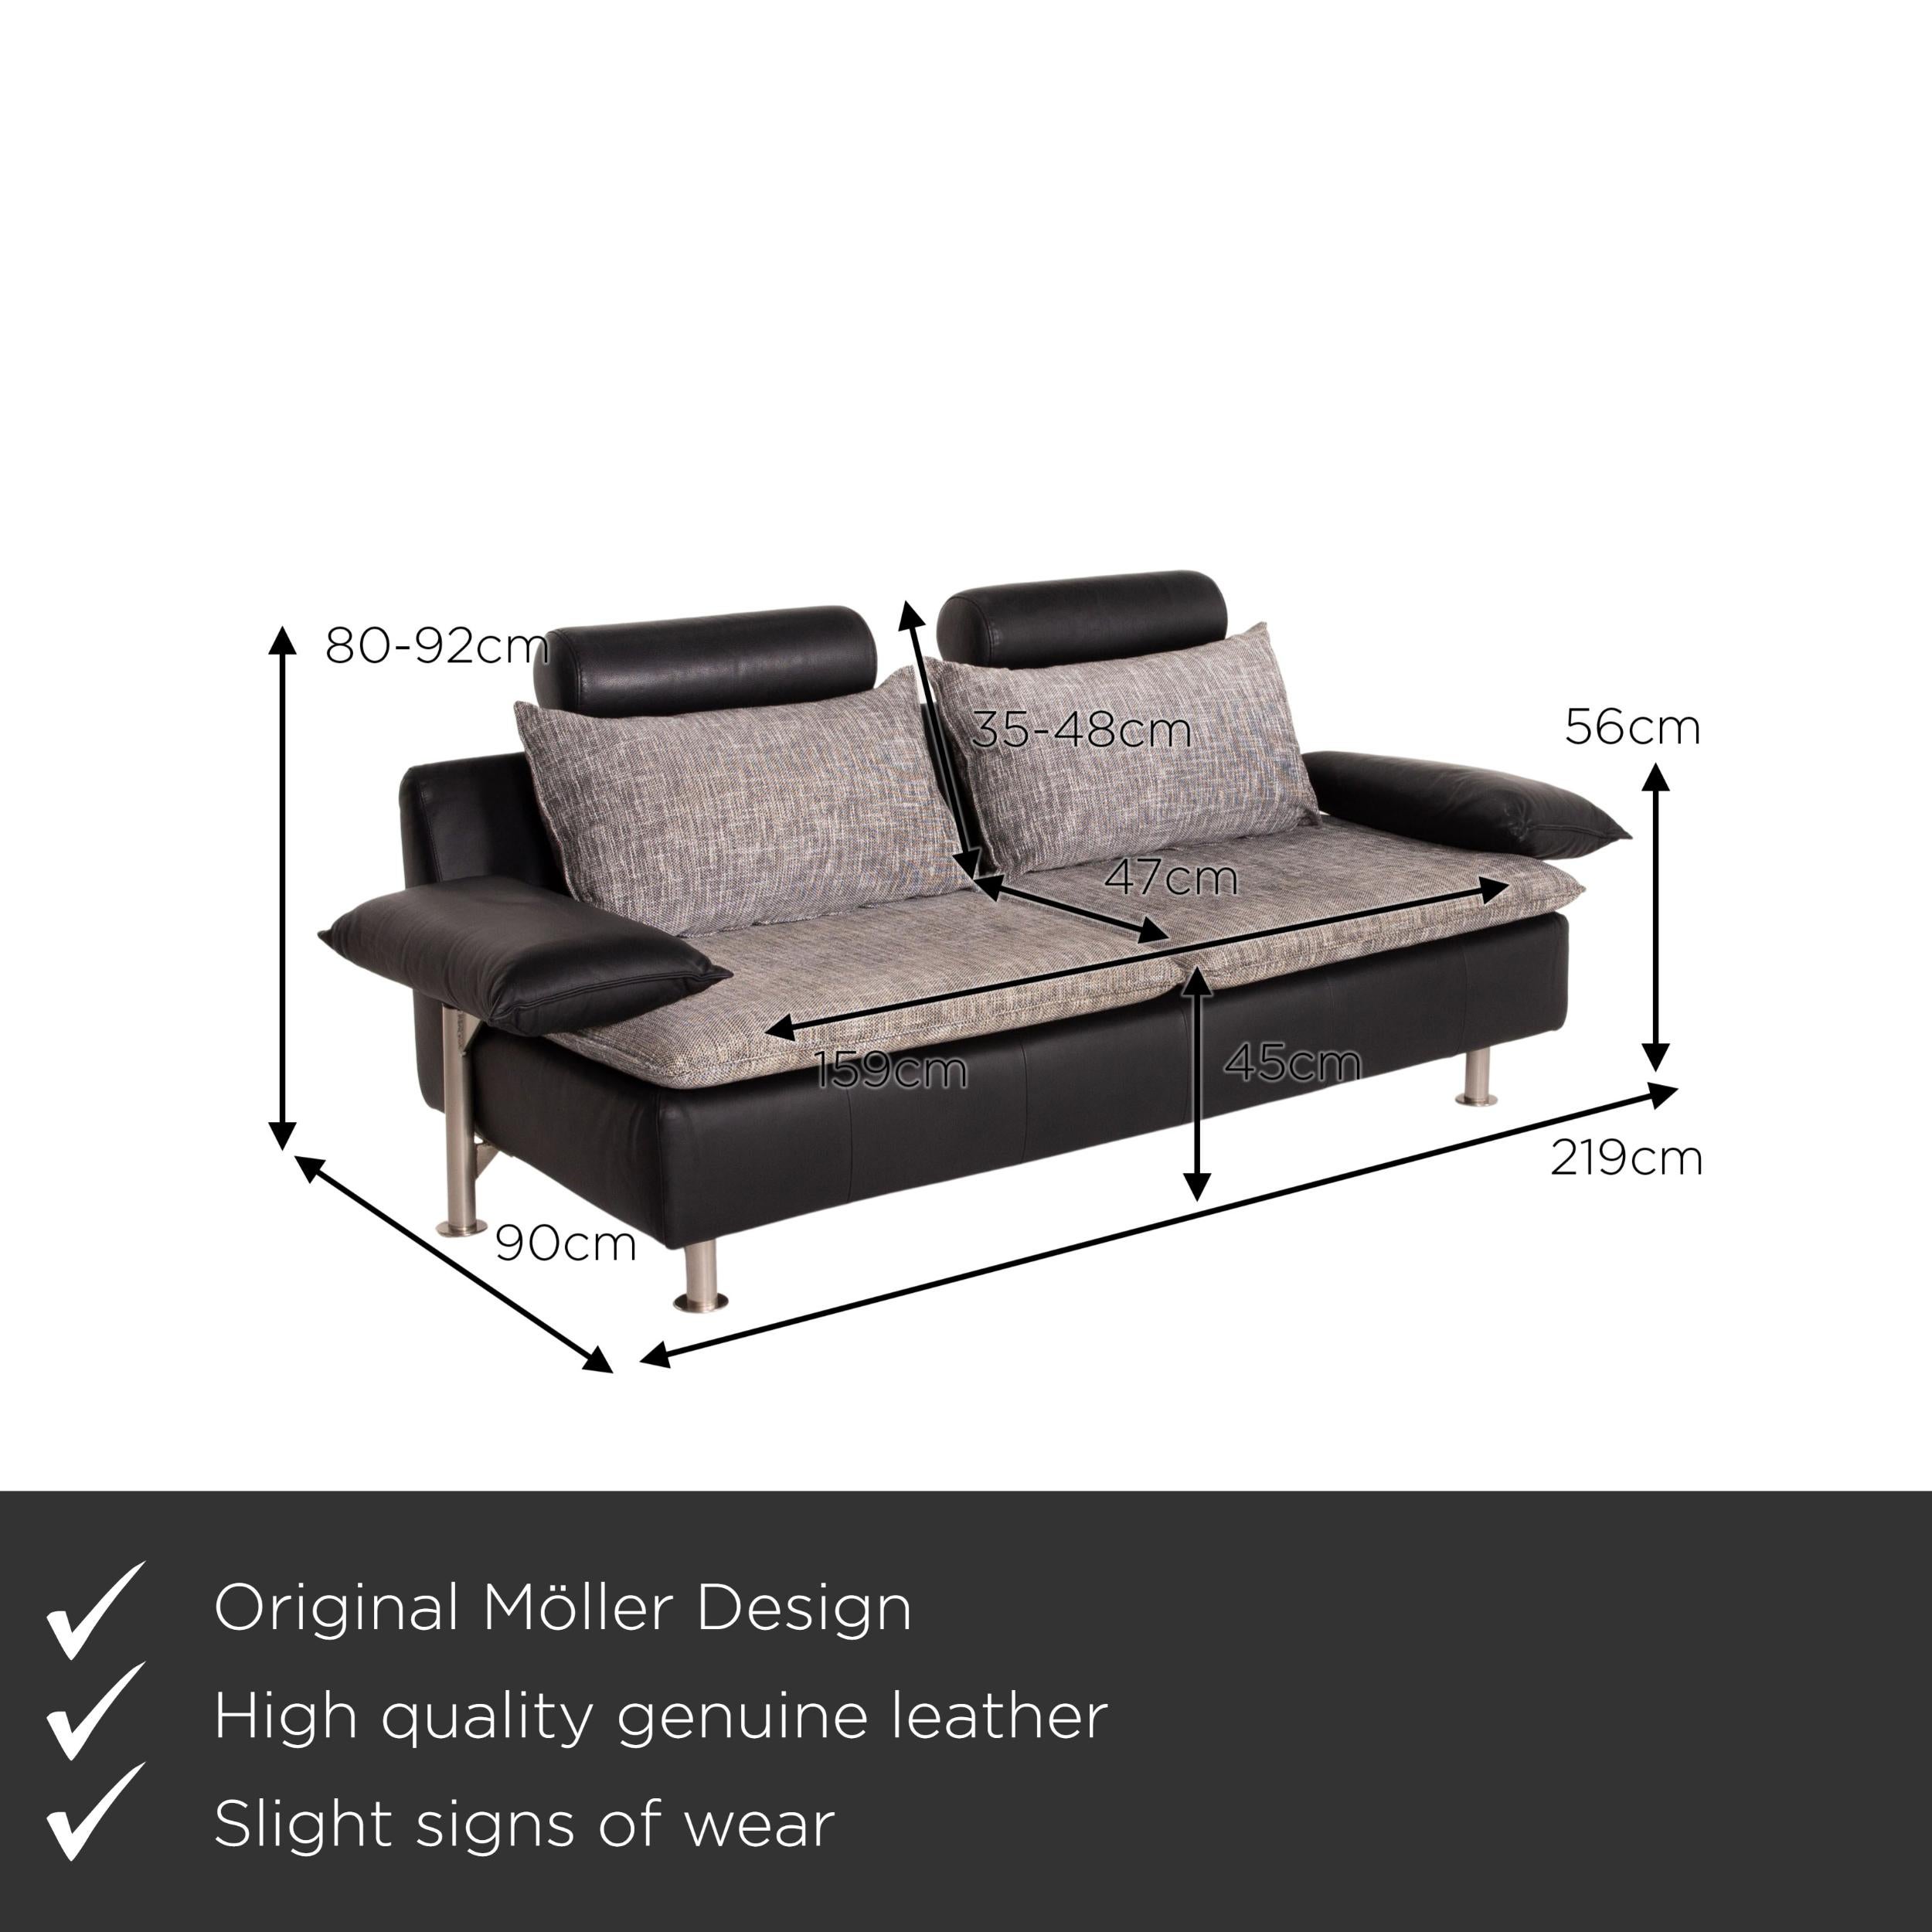 We present to you a Möller Design Tayo leather sofa black two-seat couch.

 

 Product measurements in centimeters:
 

 Depth 90
Width 219
 Height 80
 Seat height 45
 Rest height 56
 Seat depth 47
 Seat width 159
 Back height 35.